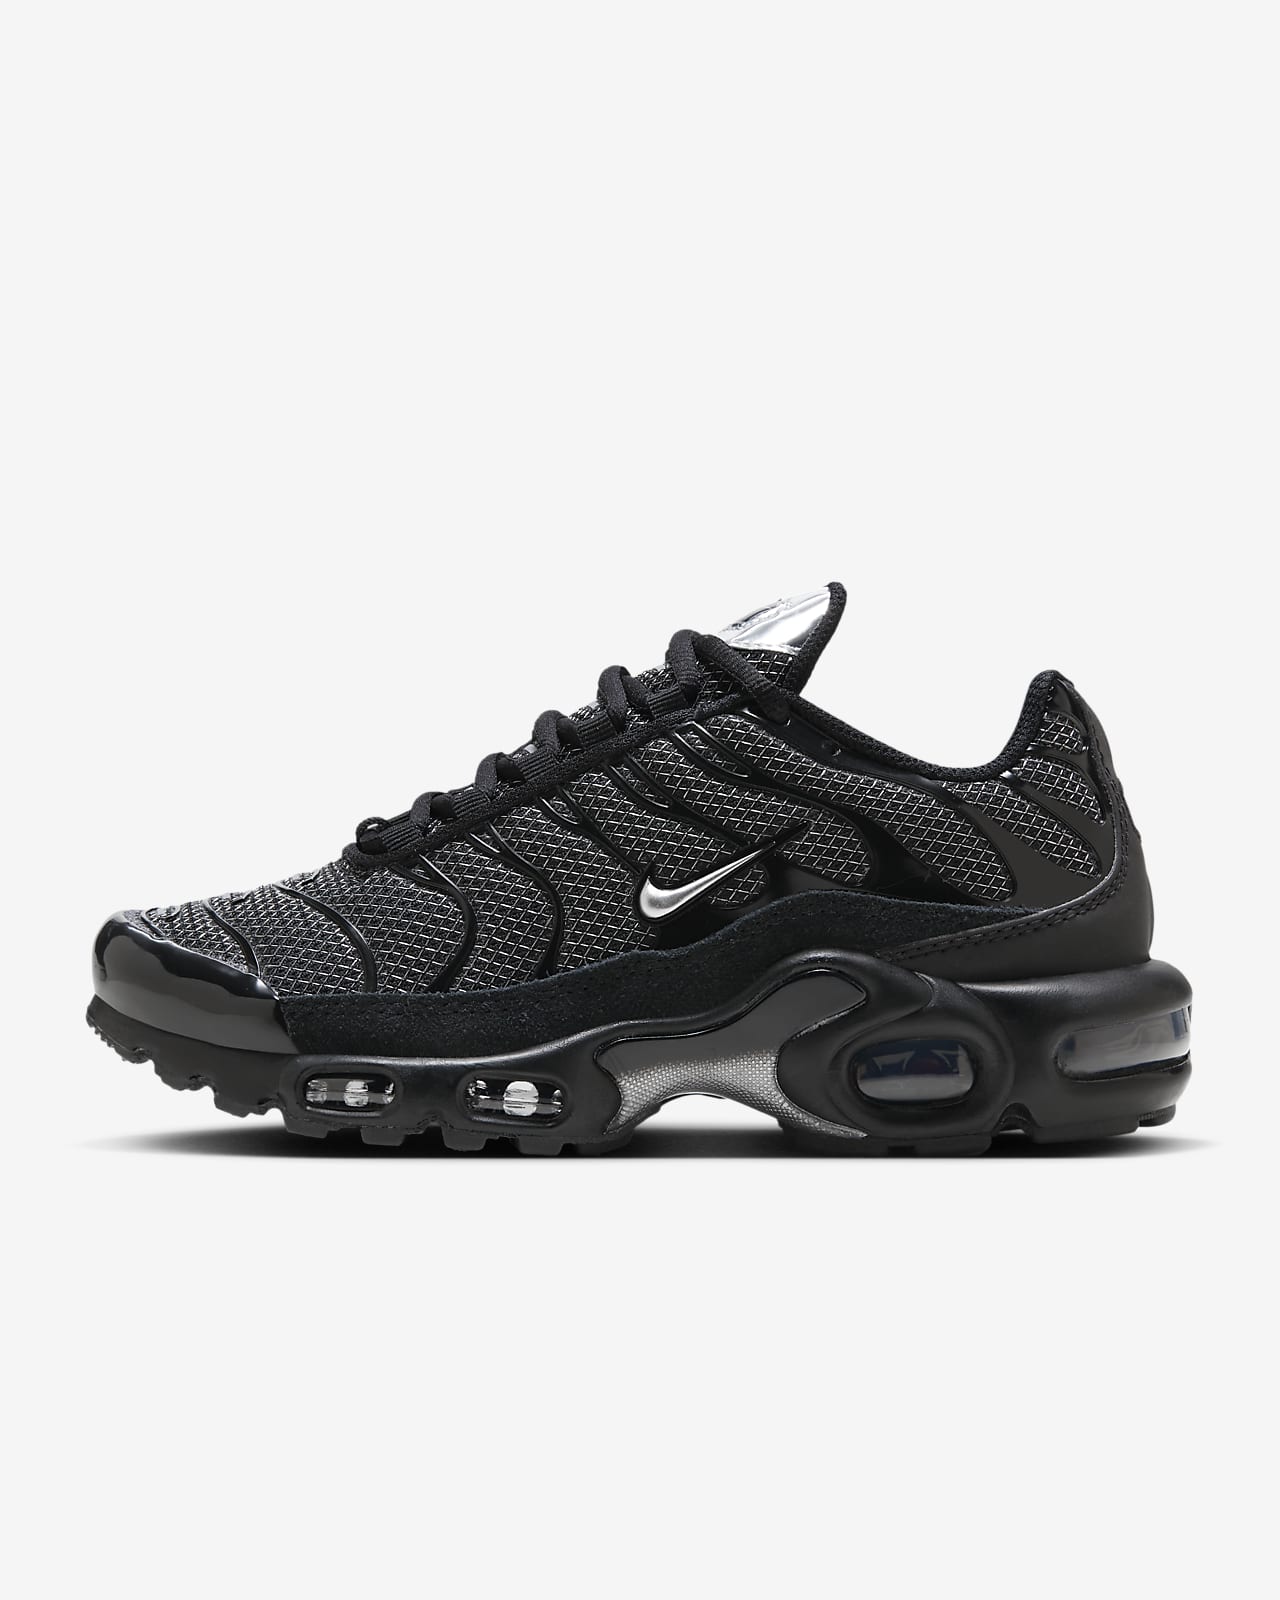 Sneakers and shoes Nike Air Max Plus